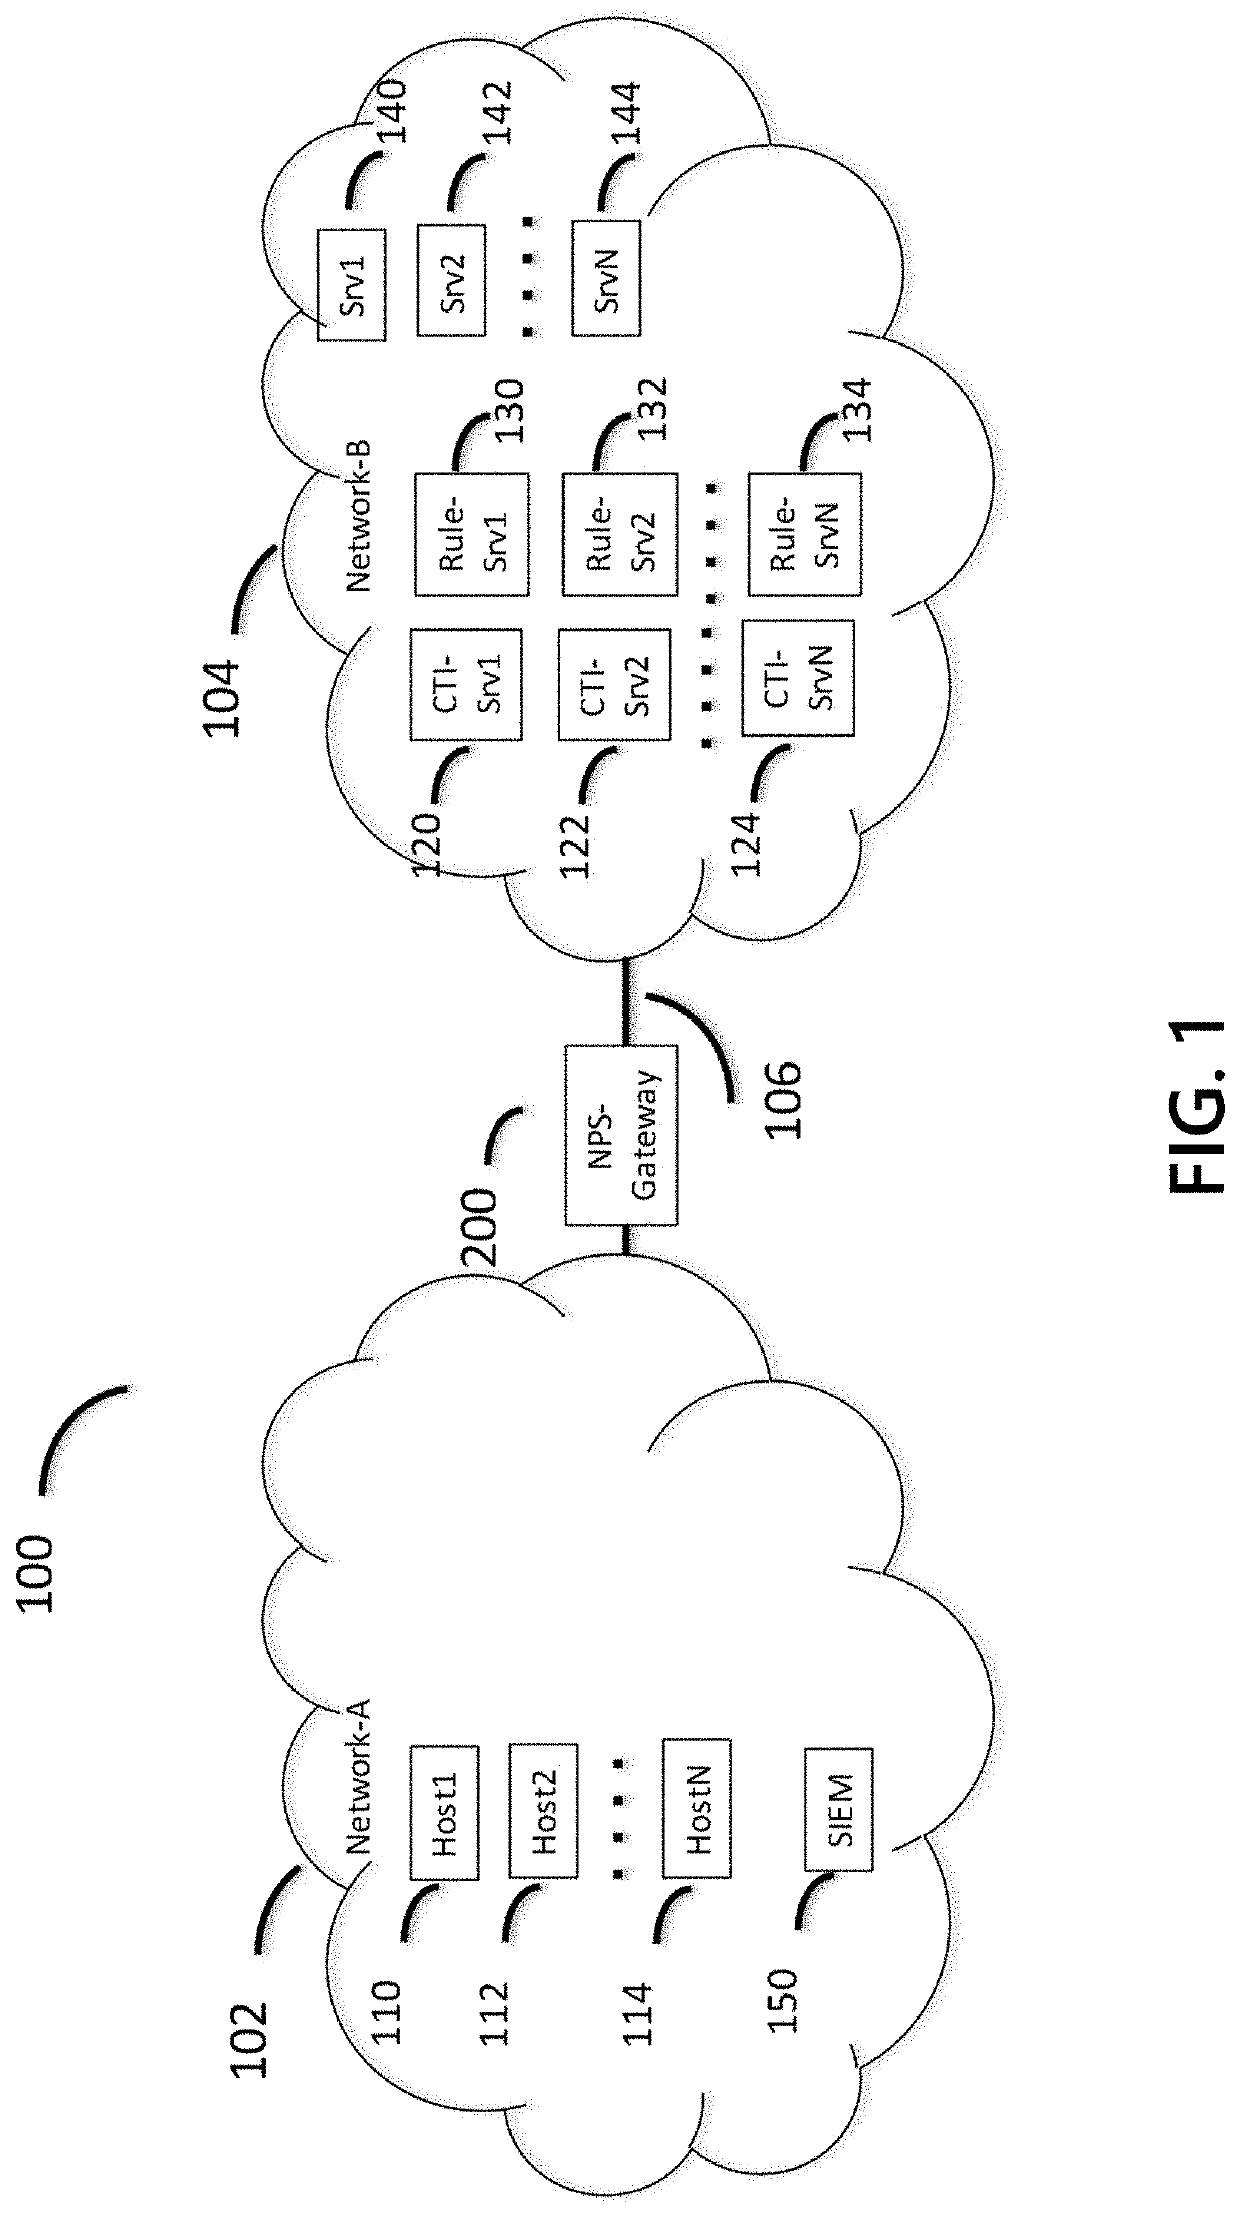 Methods and Systems for Efficient Network Protection